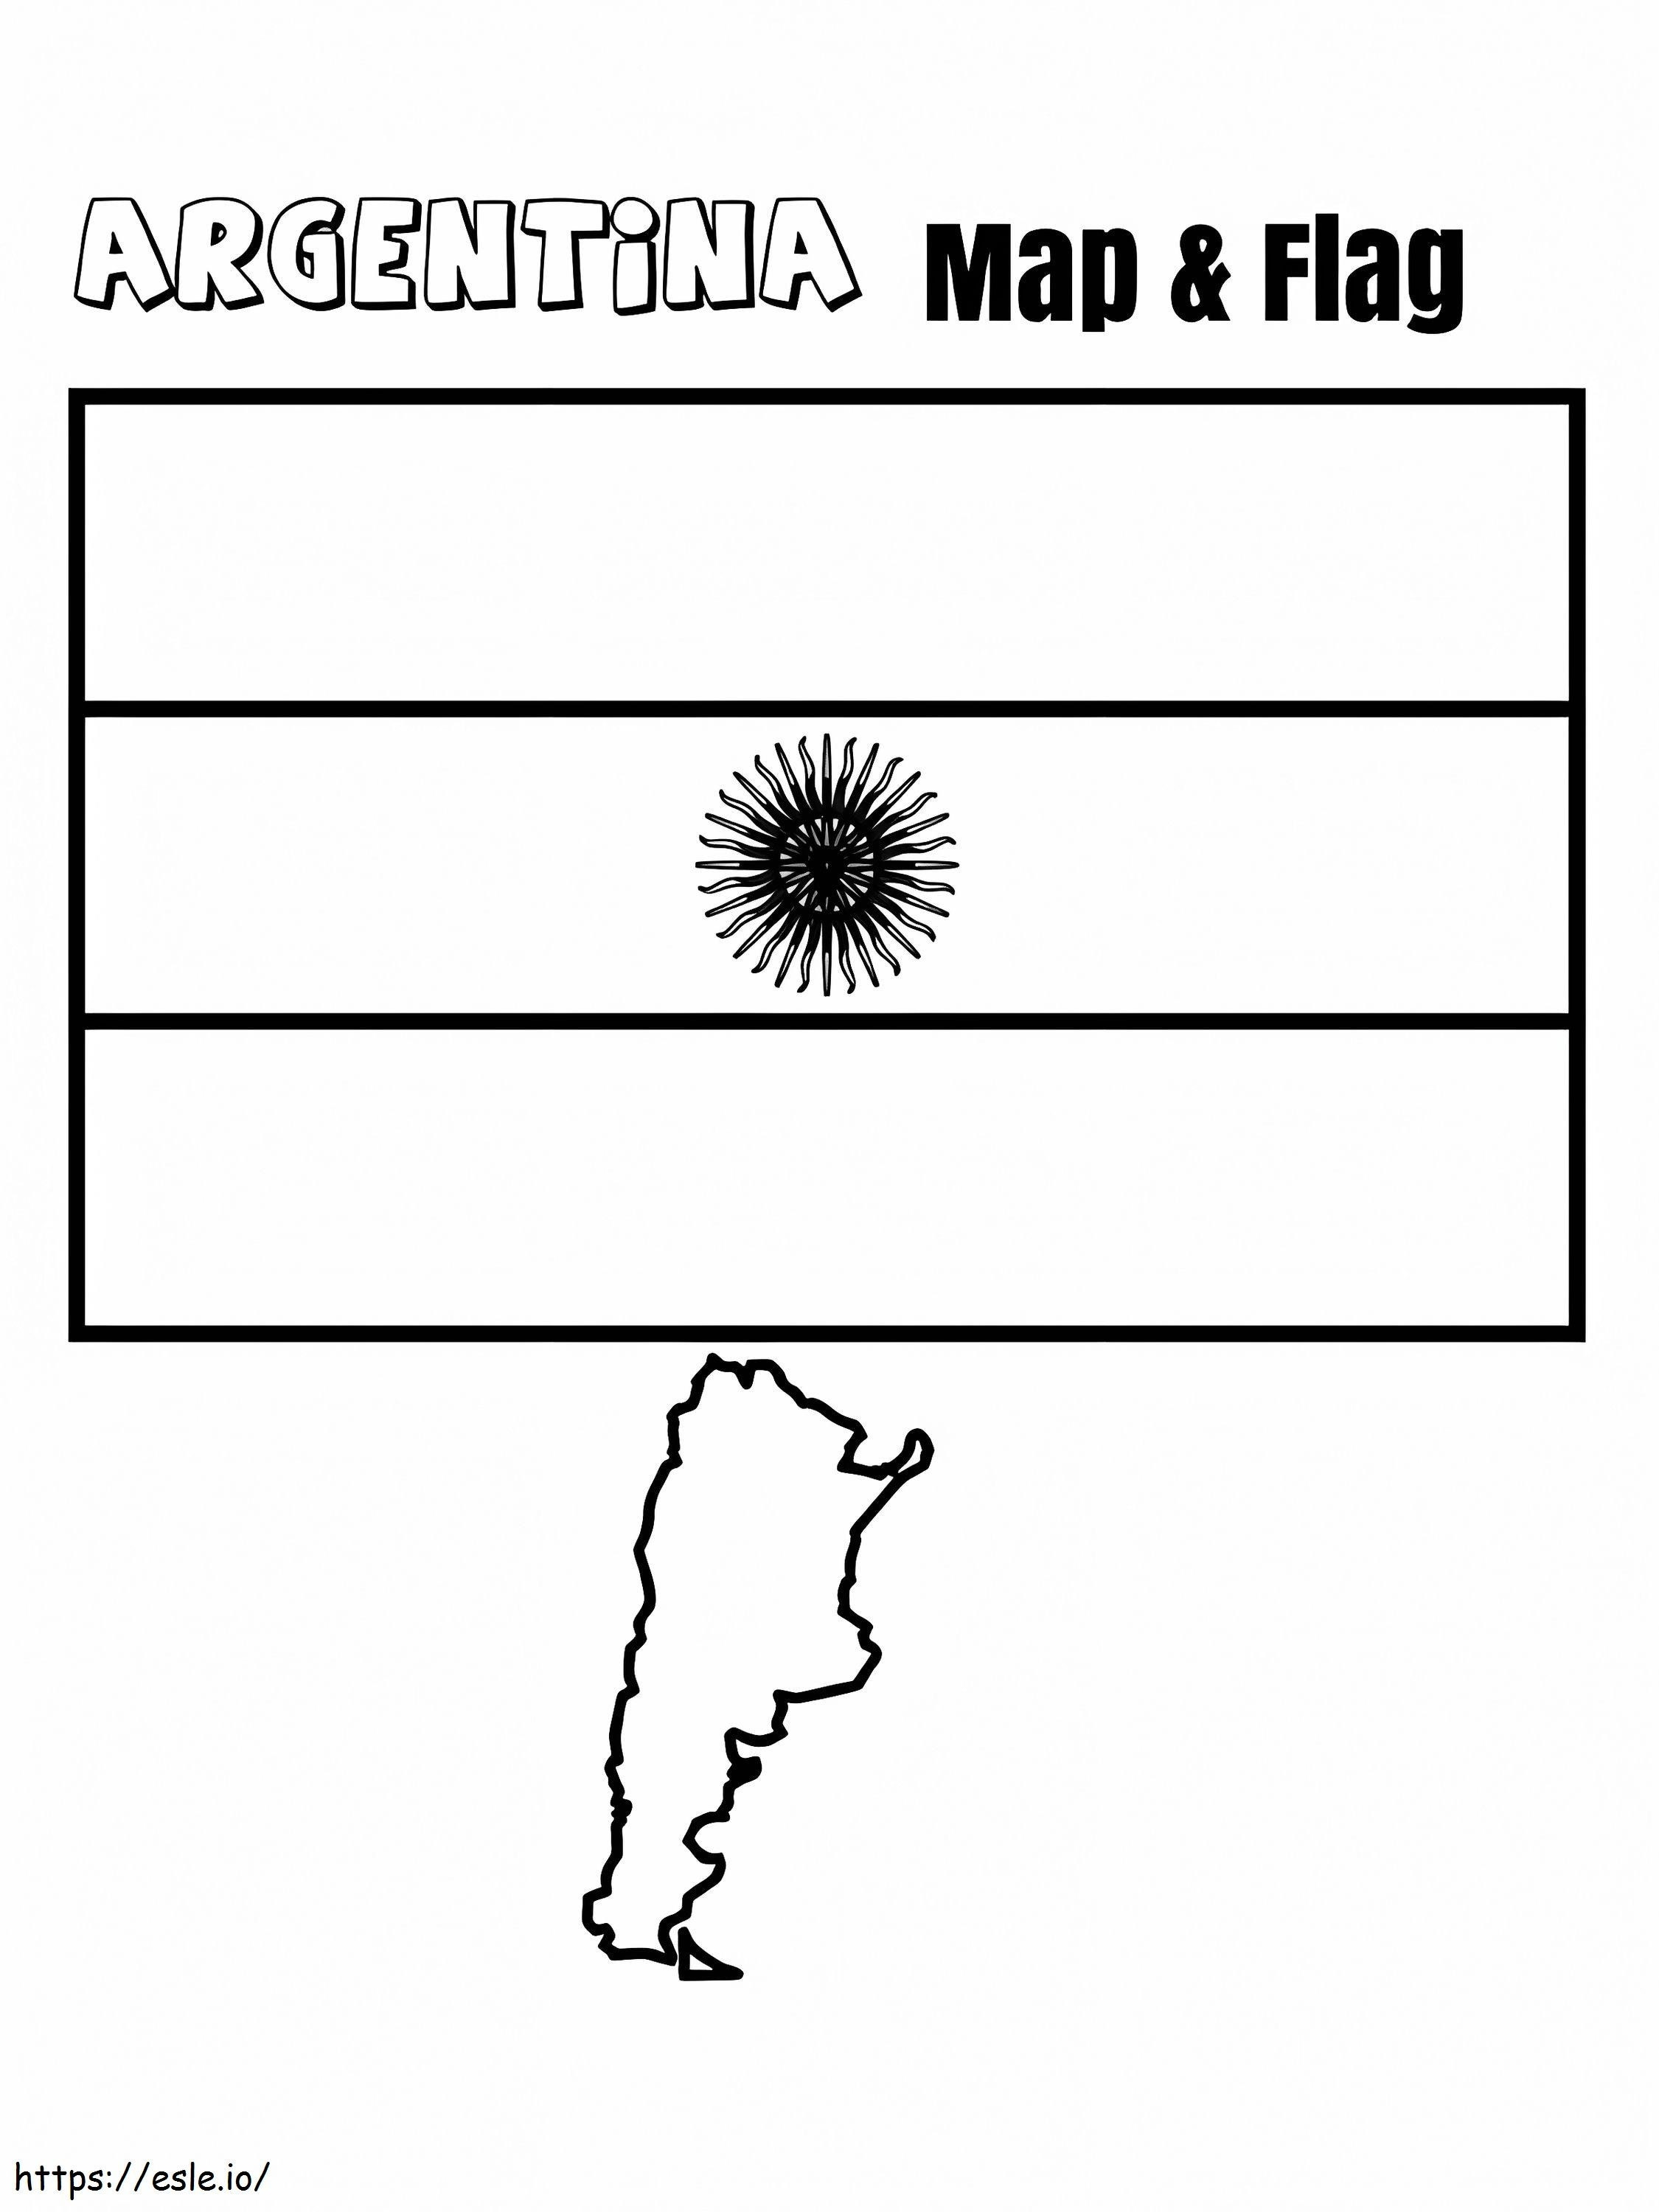 Argentina Flag And Map coloring page